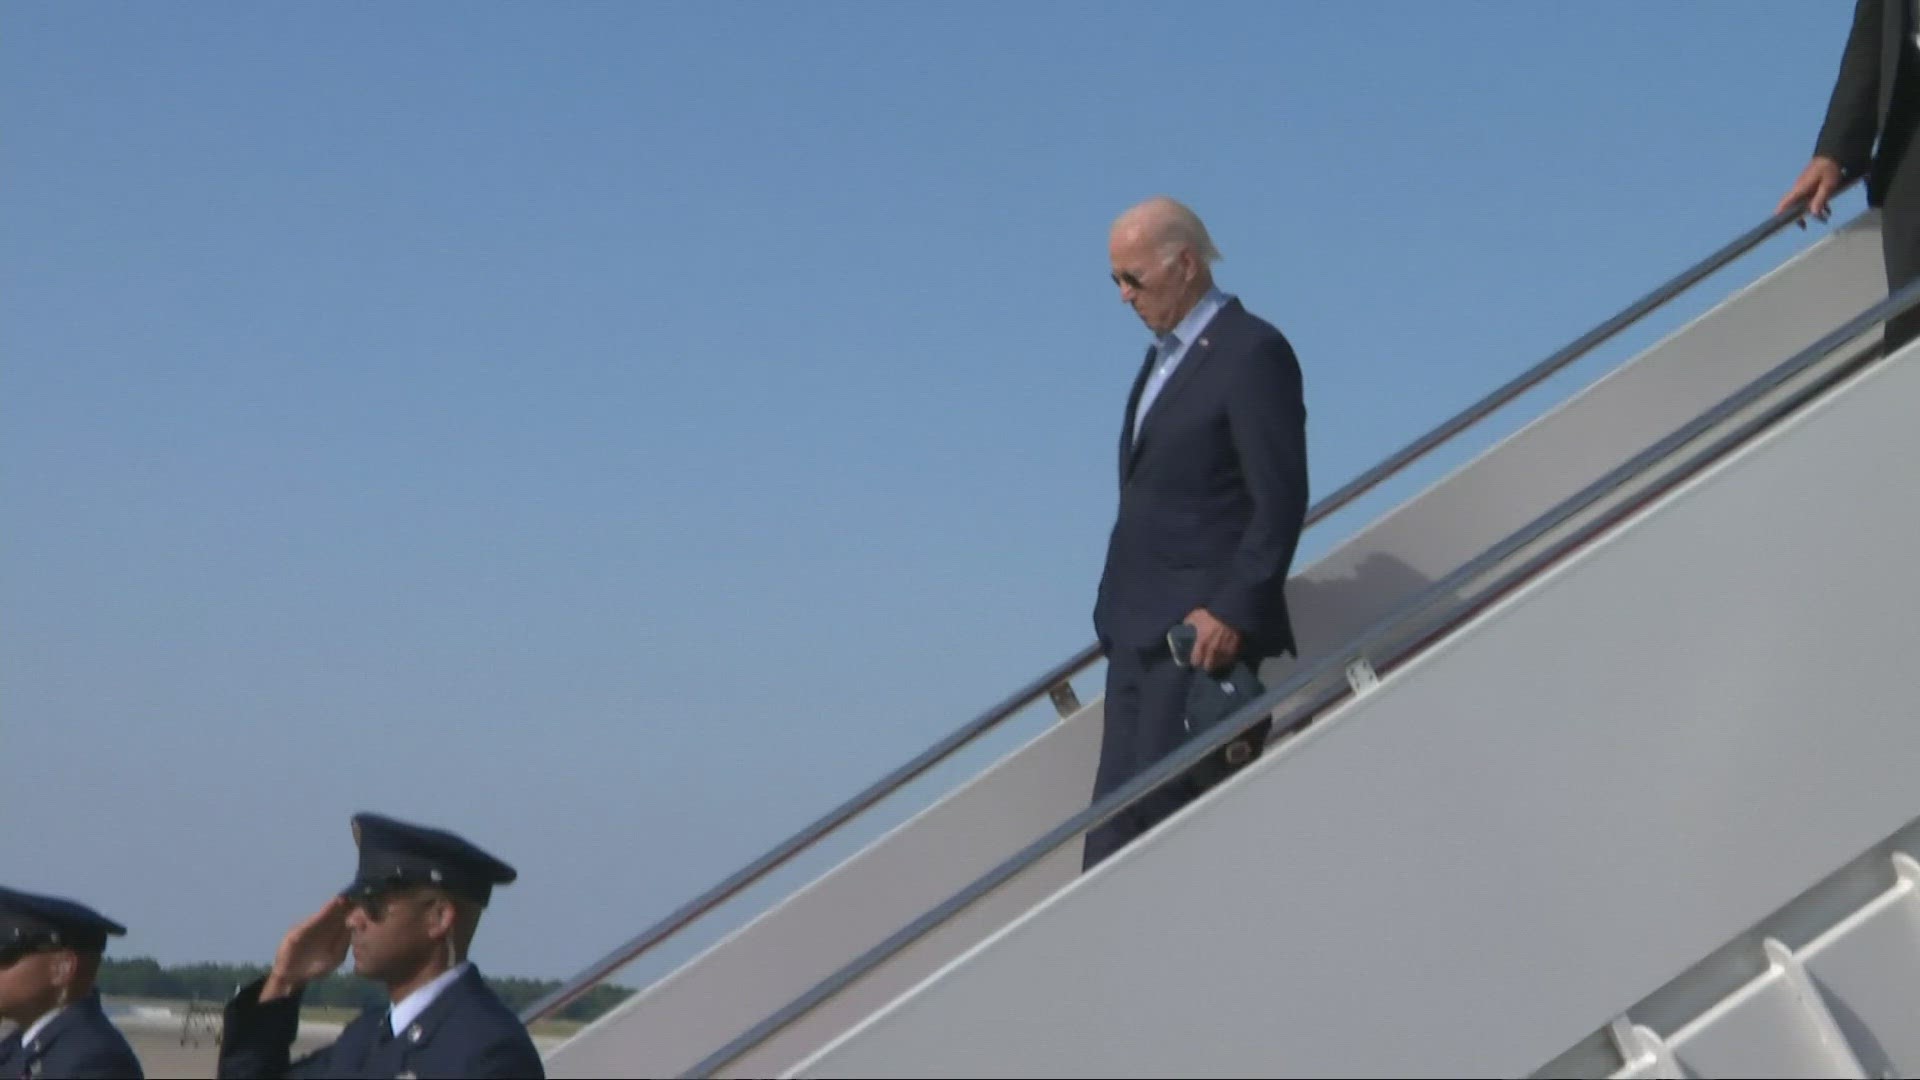 Seven months after the toxic train derailment, the White House press secretary says President Biden will visit East Palestine. No date or time has been announced.